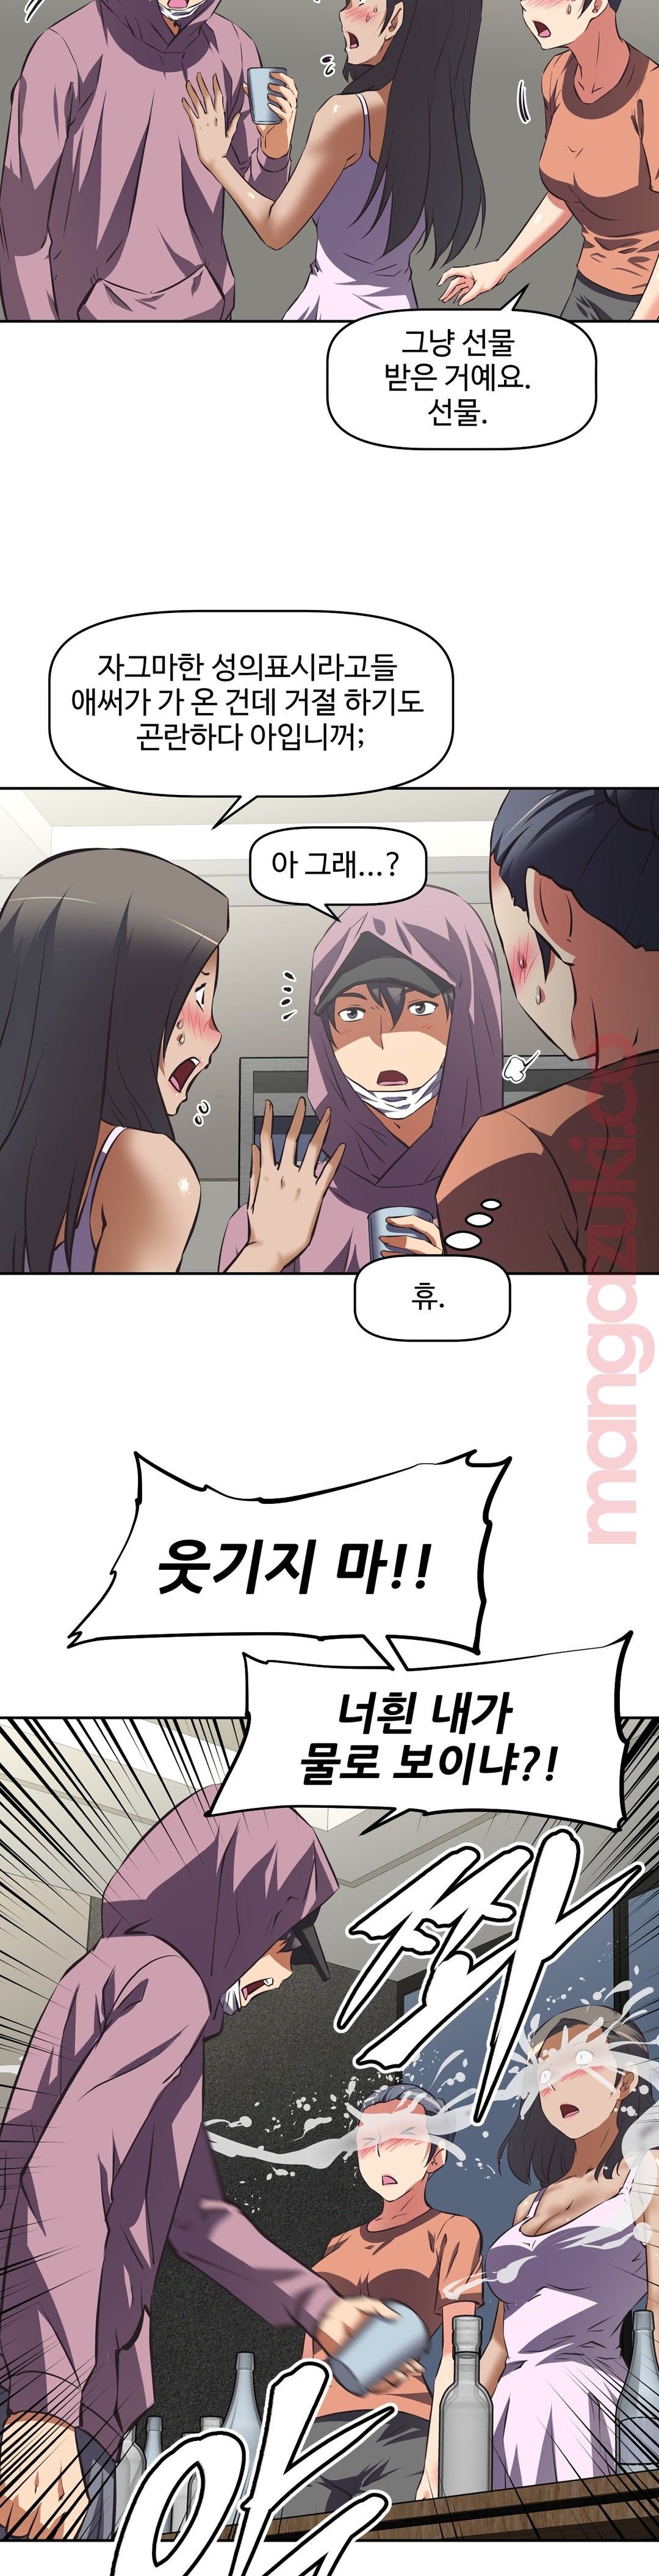 The Girls’ Nest Raw - Chapter 41 Page 4